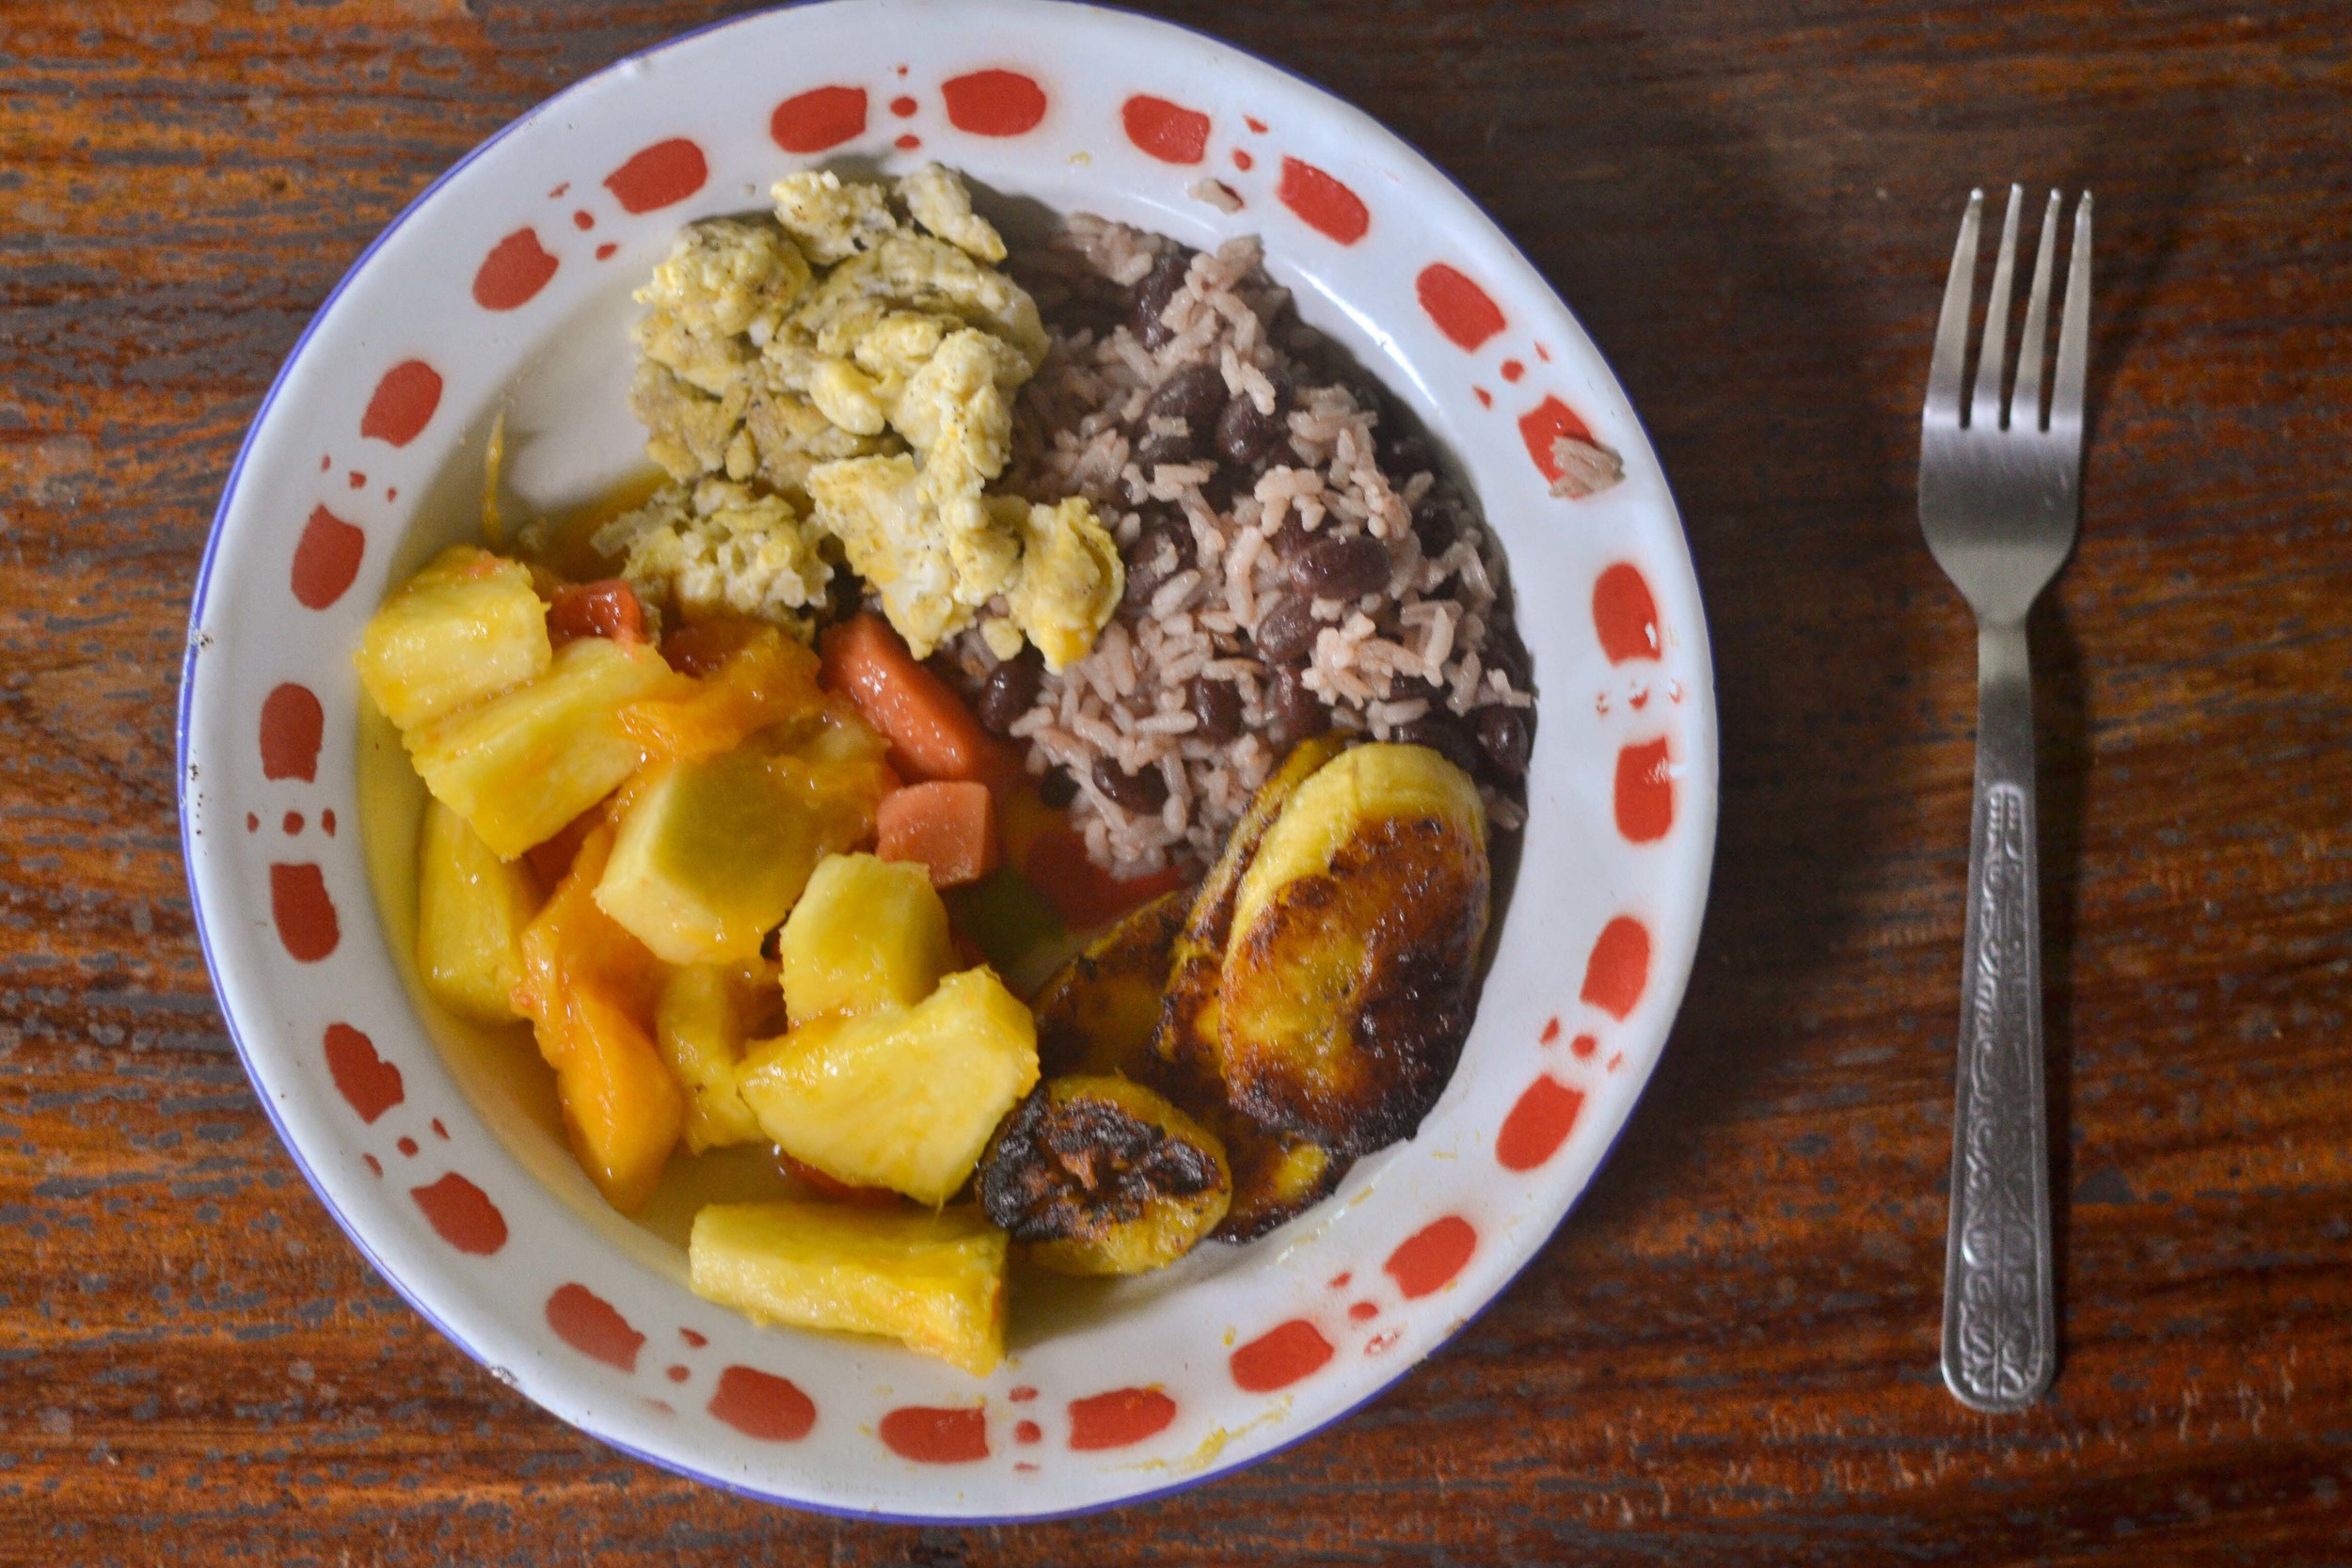  A typical breakfast: fresh mixed fruit, scrambled eggs, gallo pinto (rice and red beans mixed together), and fried plantains. 